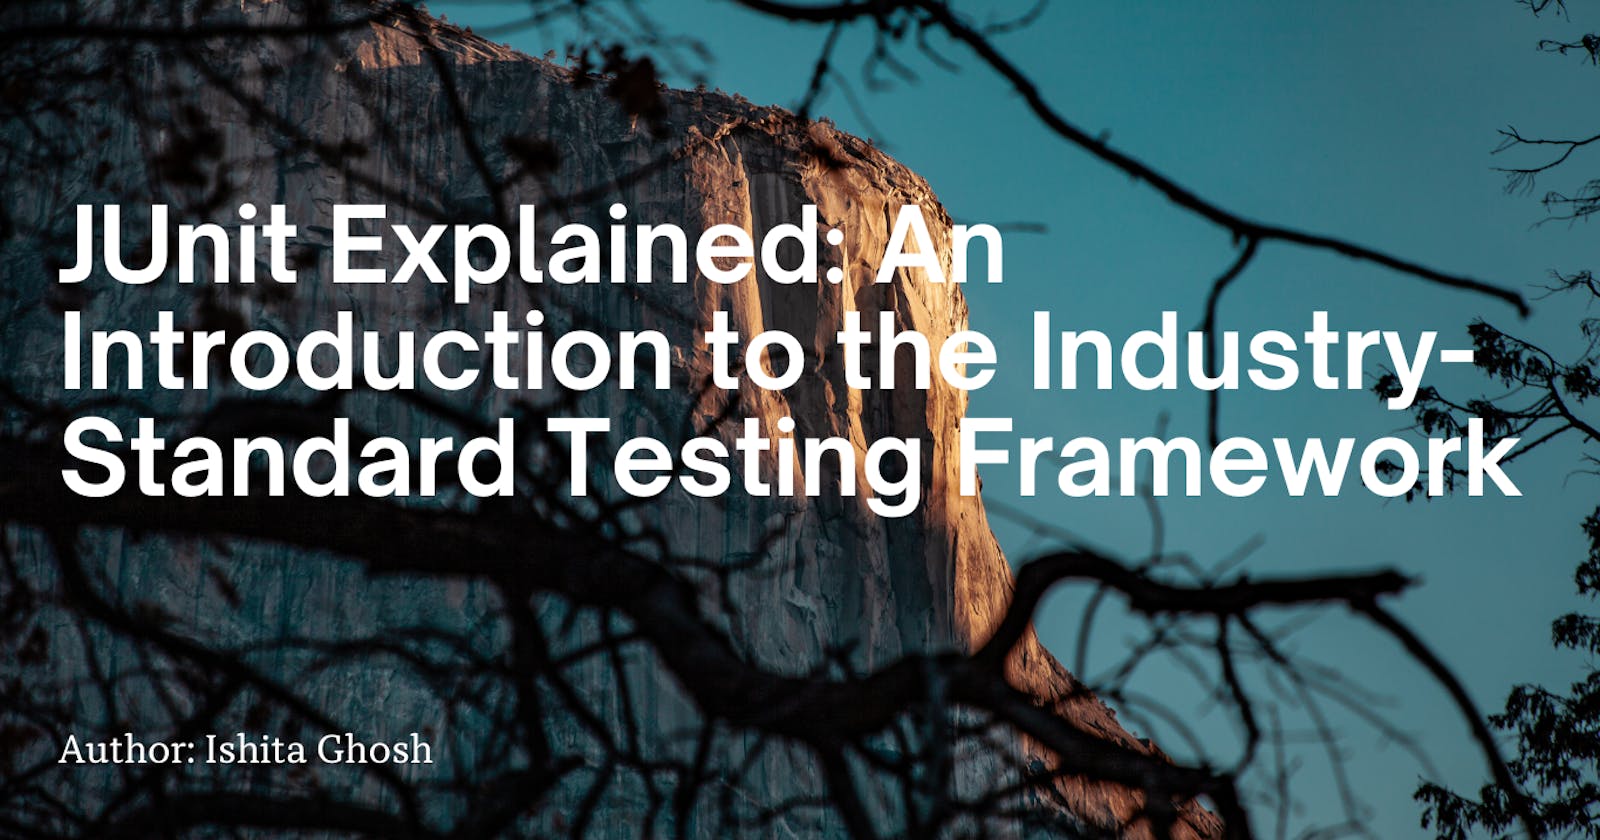 JUnit Explained: An Introduction to the Industry-Standard Testing Framework